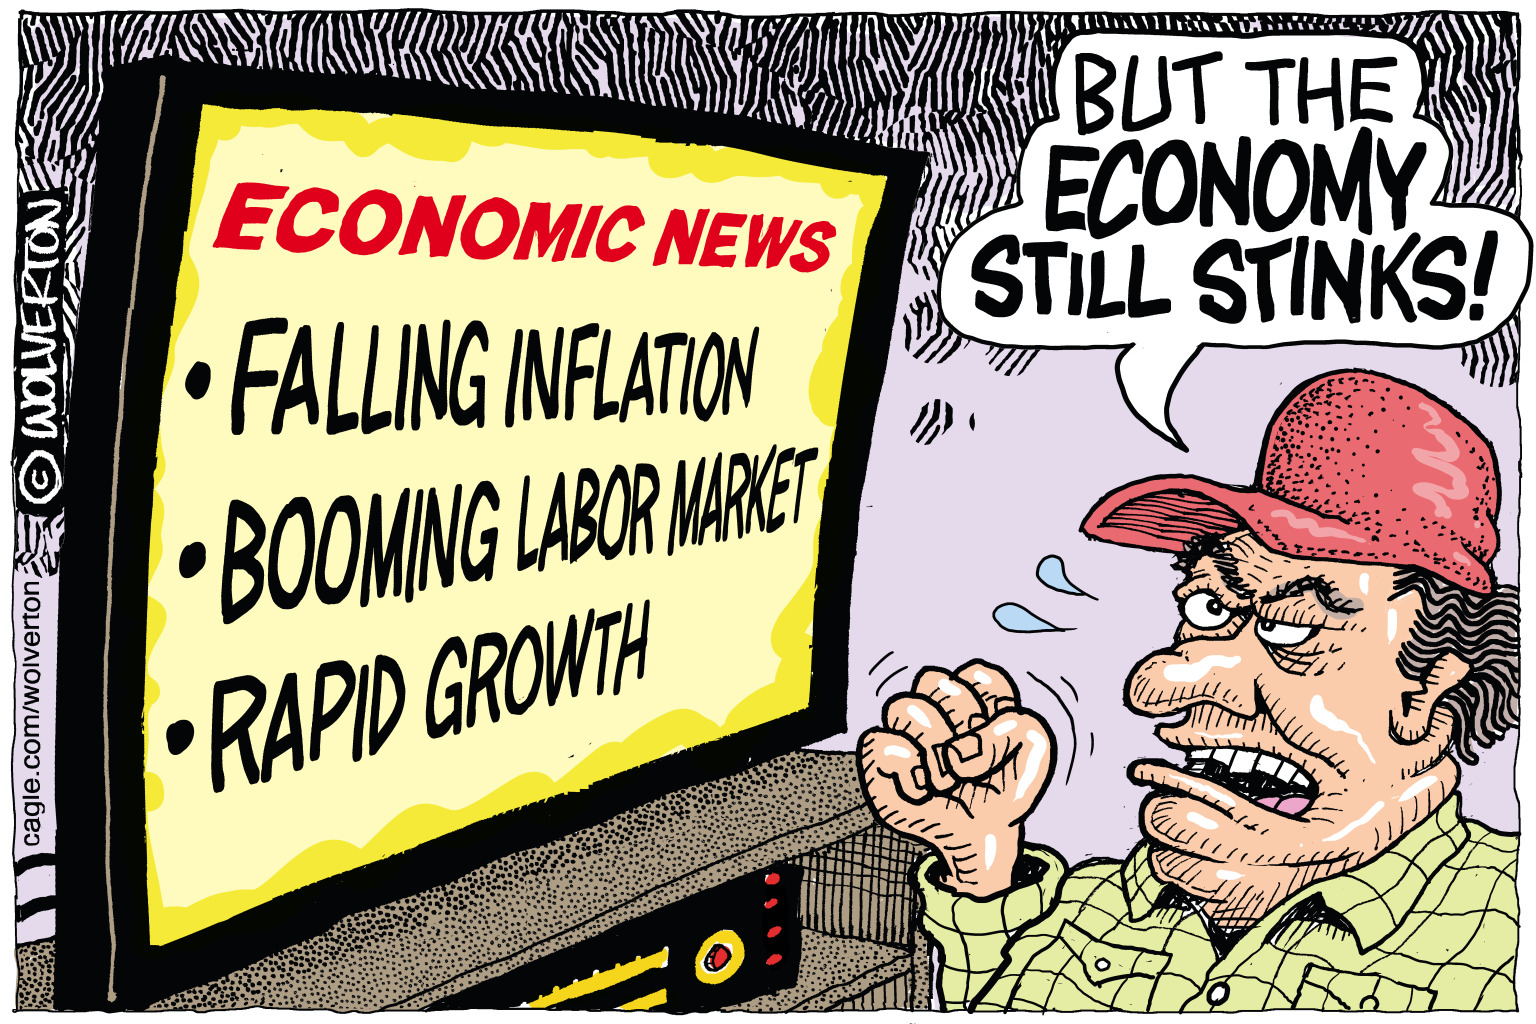 Some Think The Economy Stinks - By Monte Wolverton